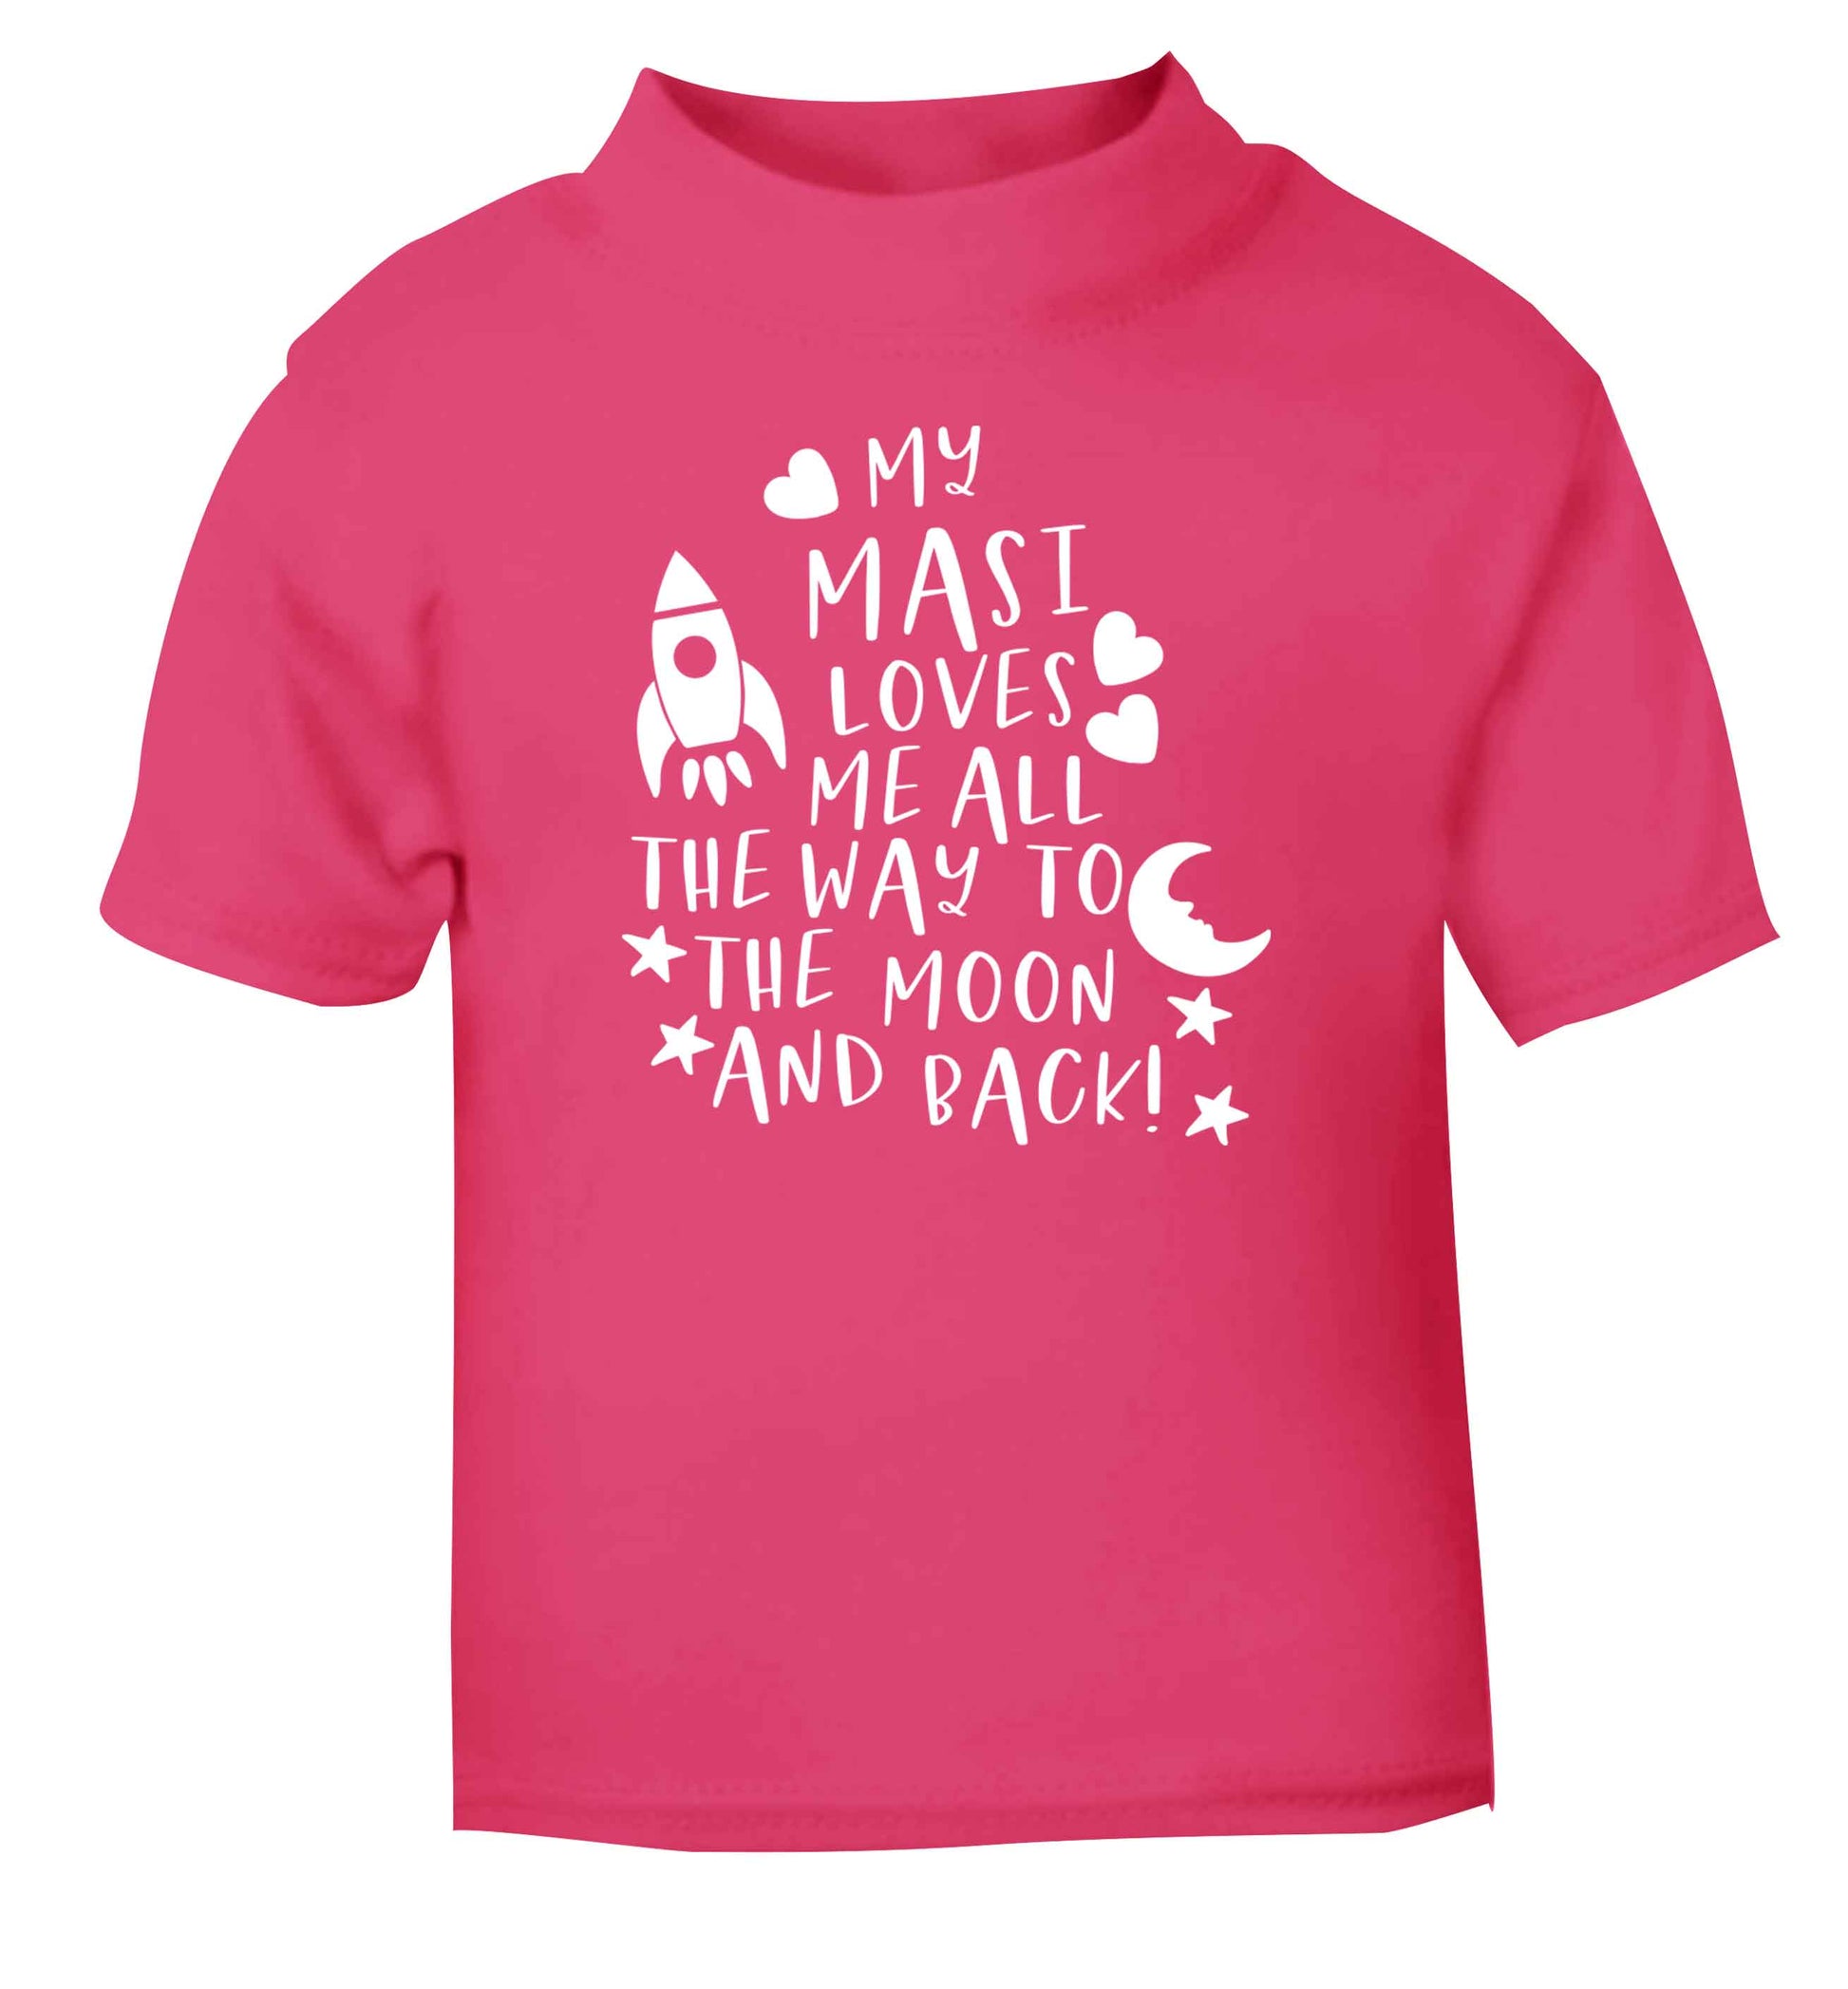 My masi loves me all the way to the moon and back pink Baby Toddler Tshirt 2 Years